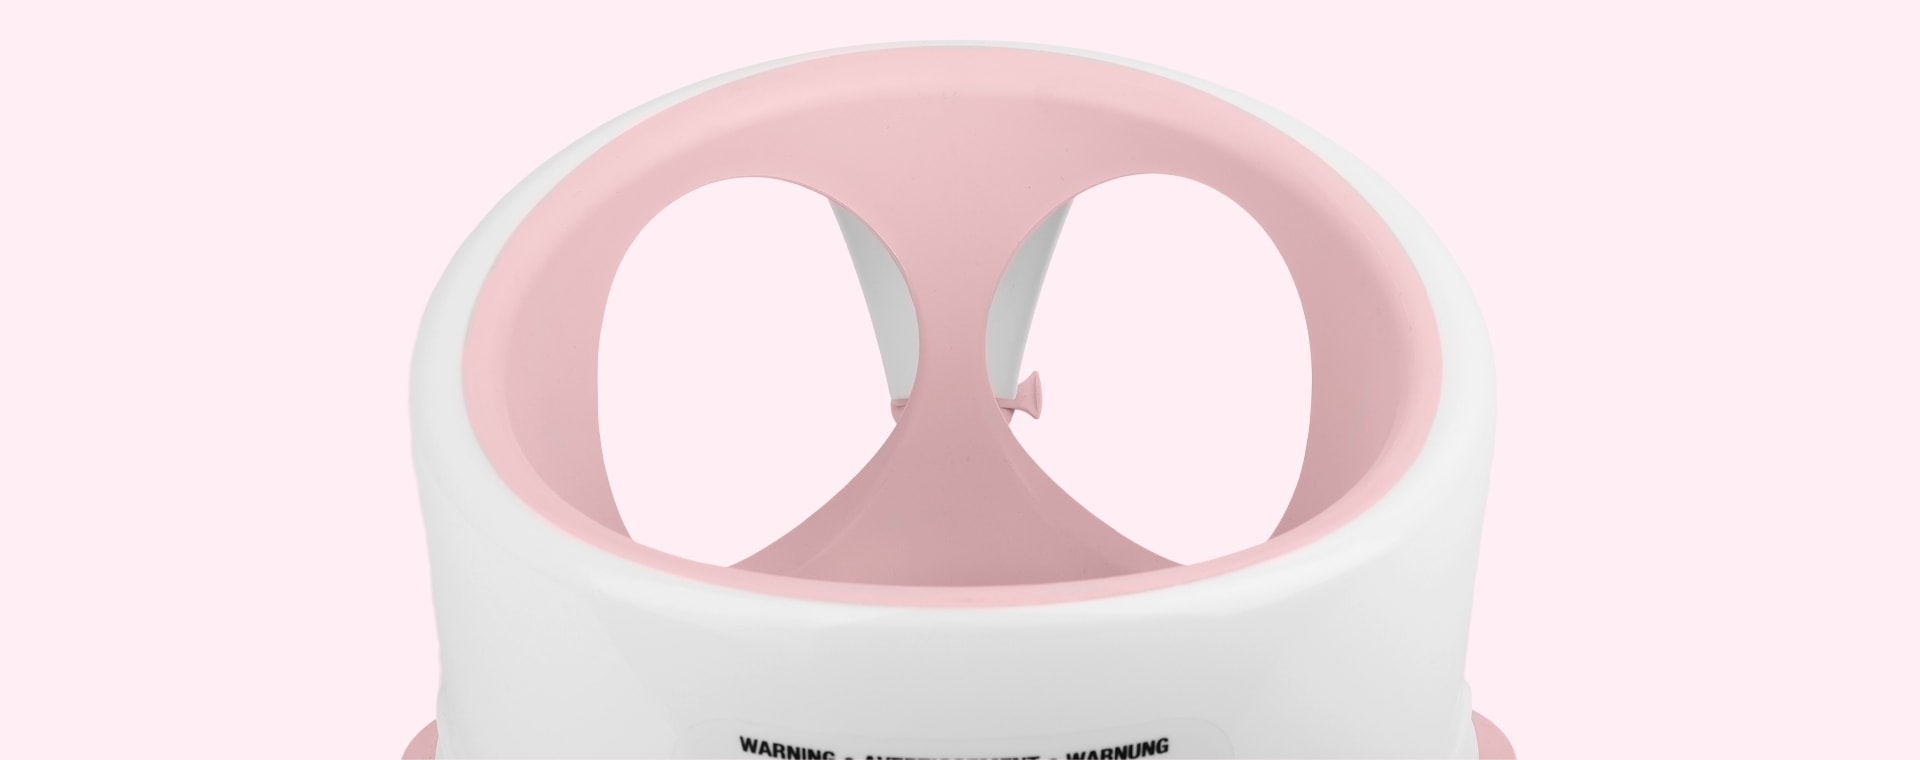 Pink Angelcare Baby Bath Seat